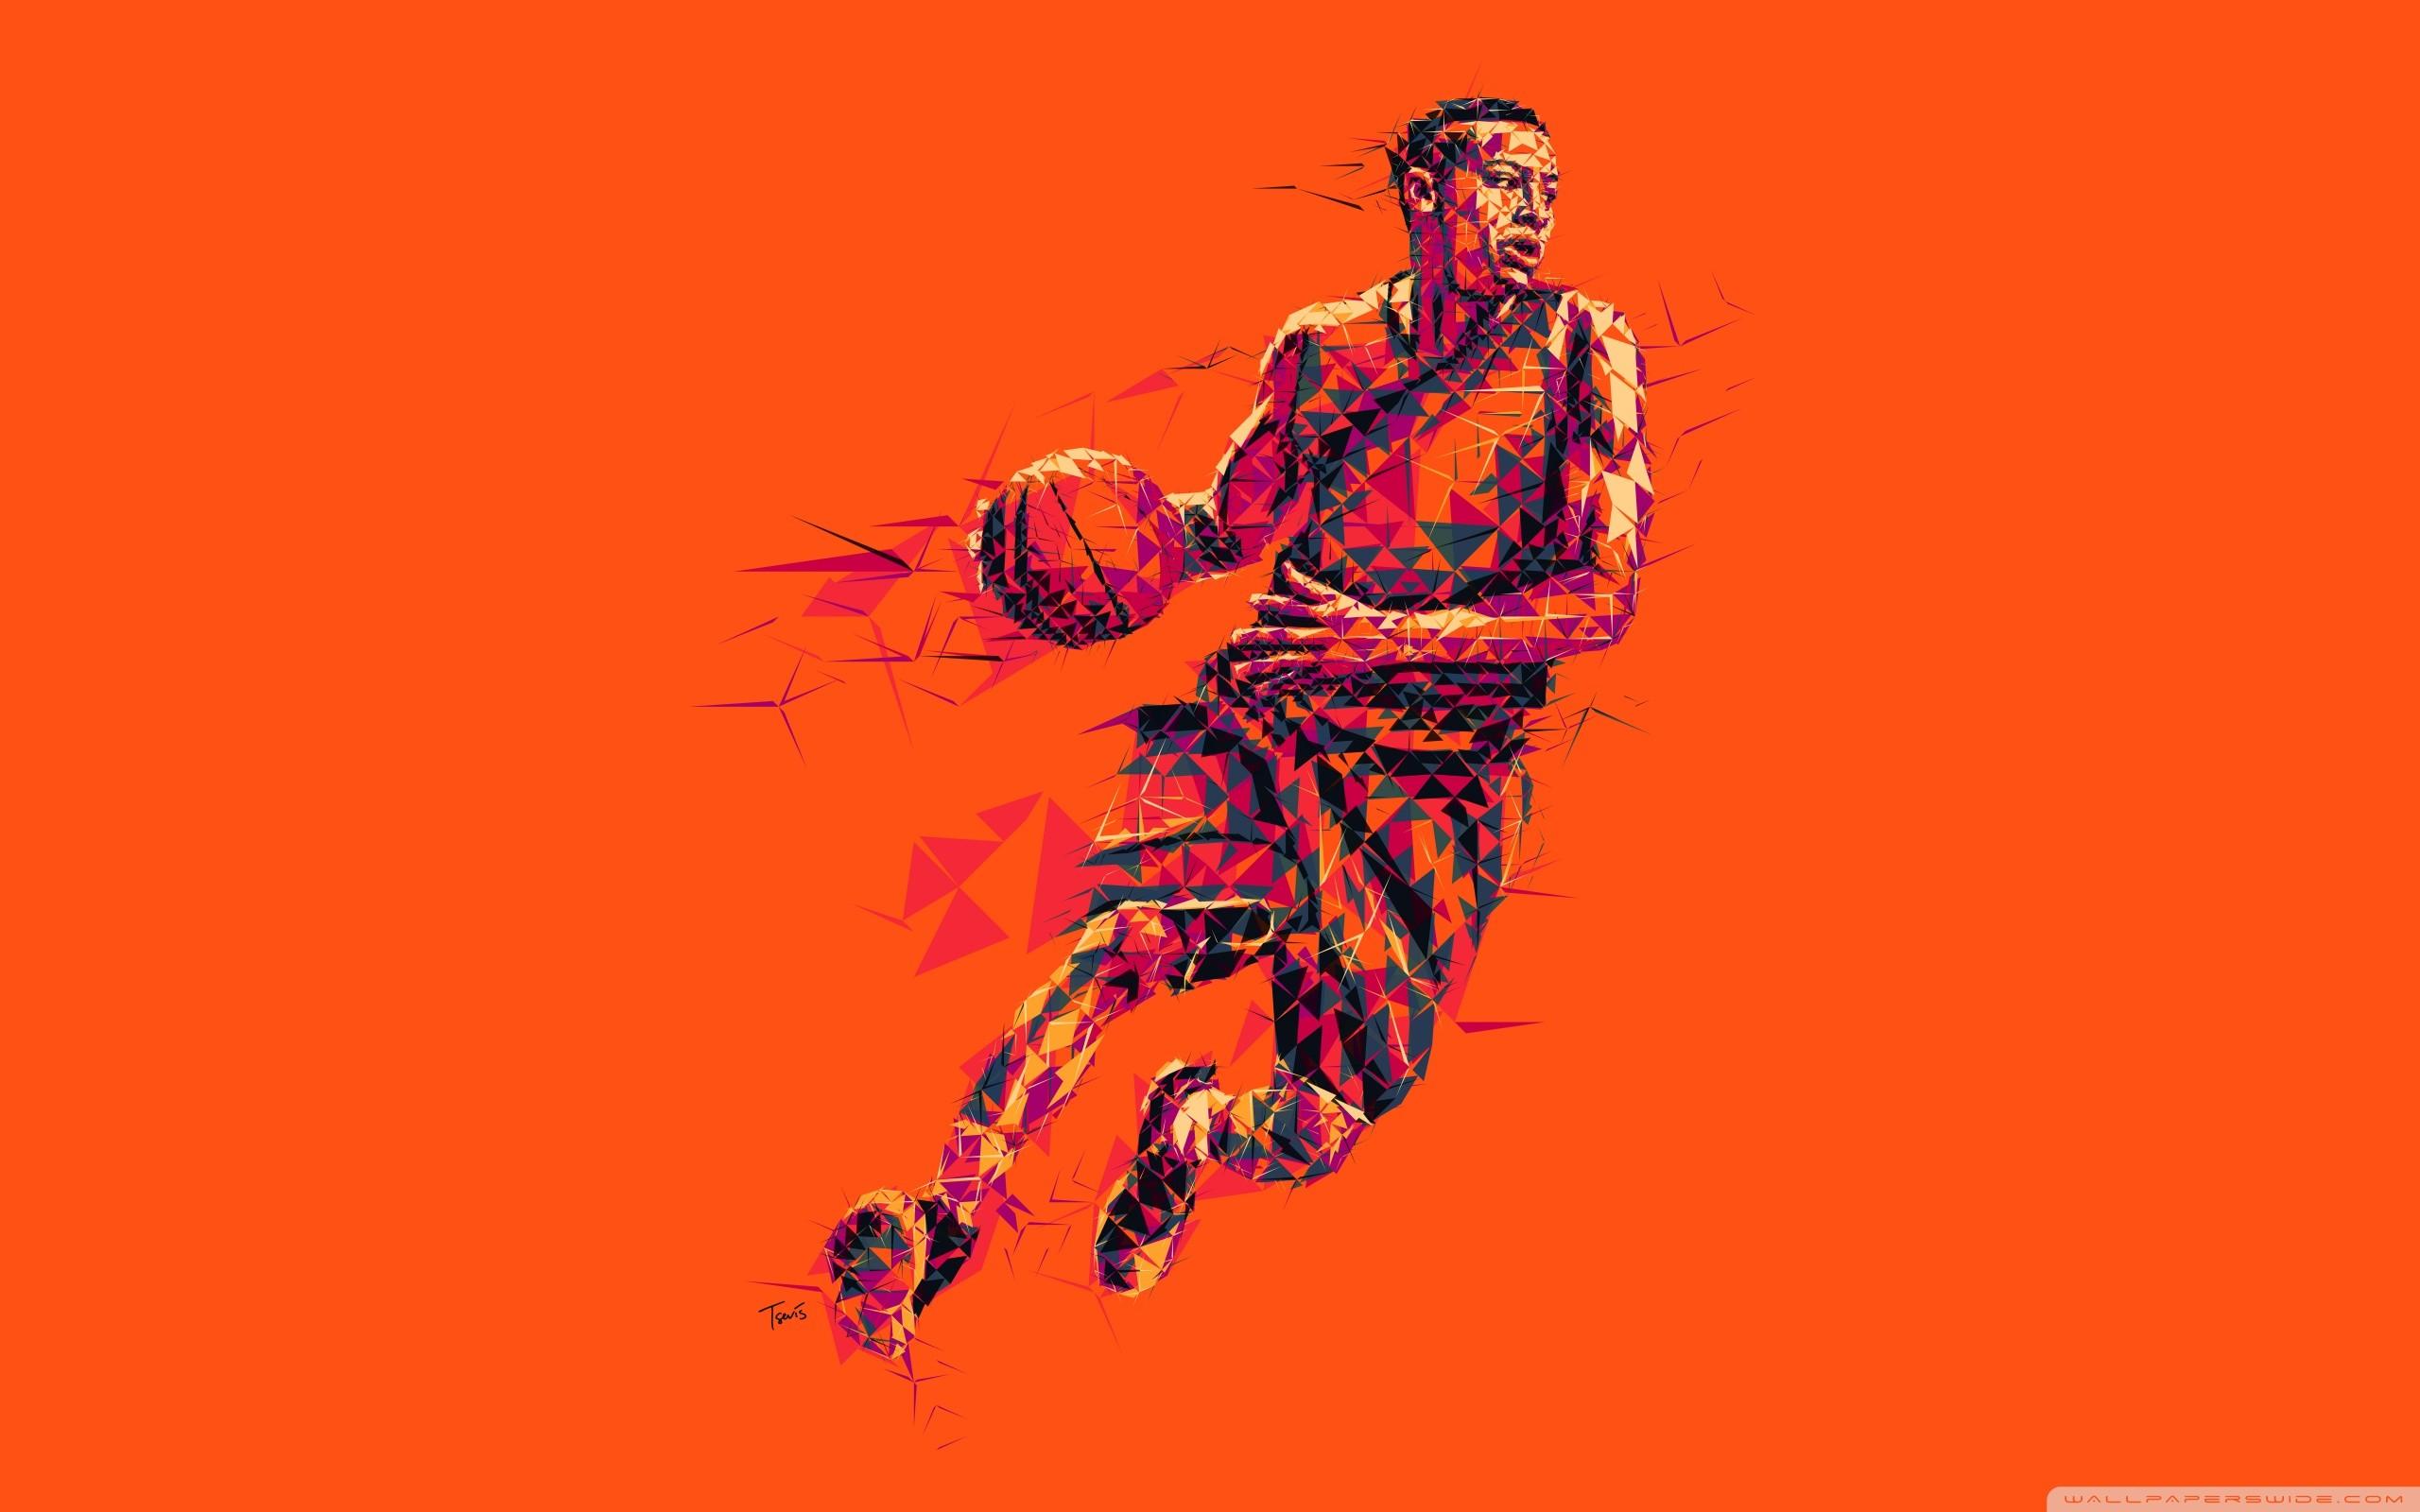 Nike Wallpaper Basketball (the best image in 2018)